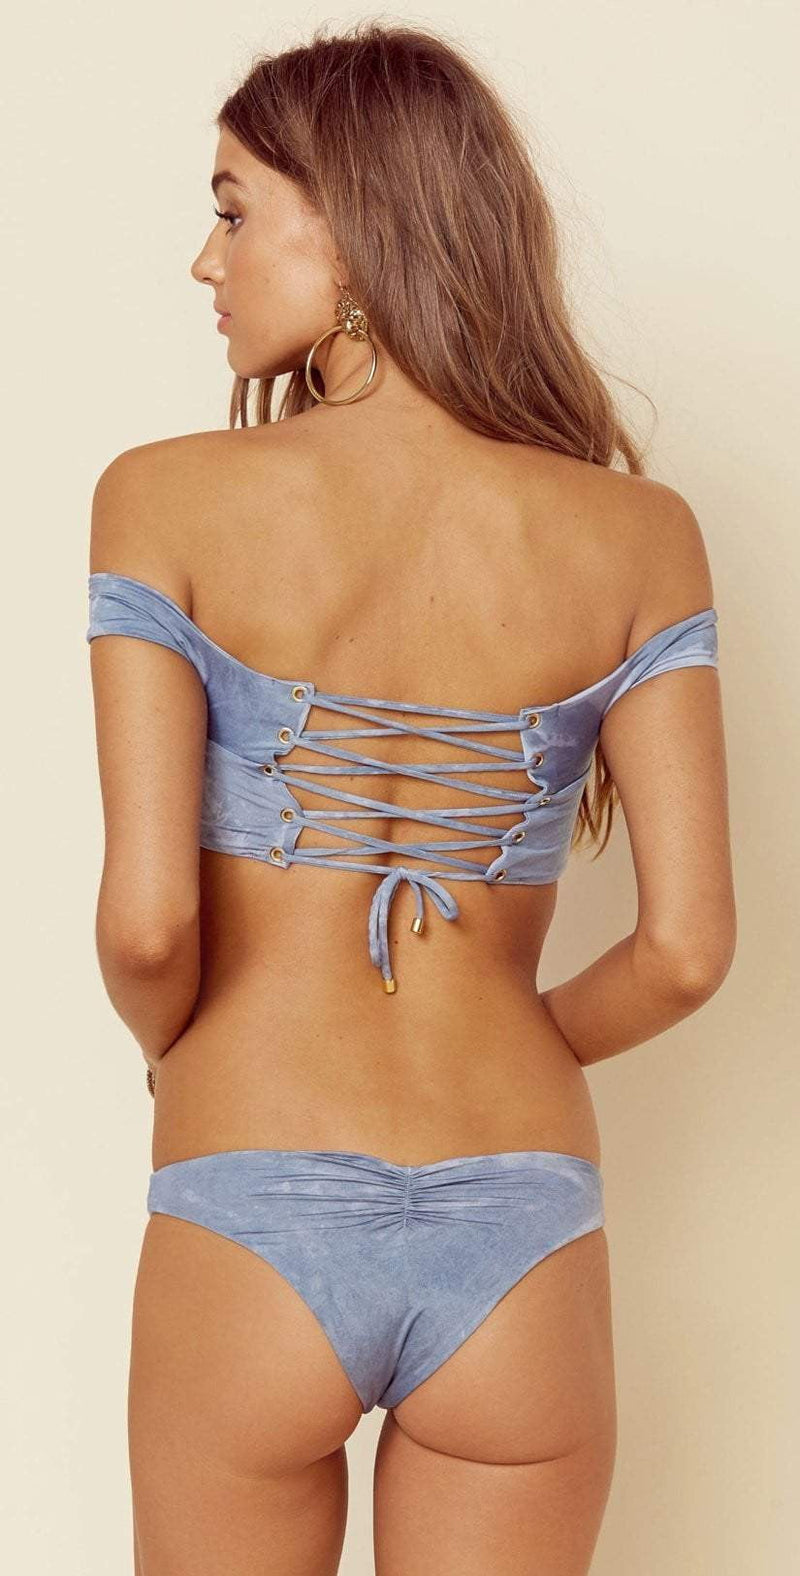 Blue Life Rising Sun Off The Shoulder Top In Ice Blue Tie Dye 238-2520: